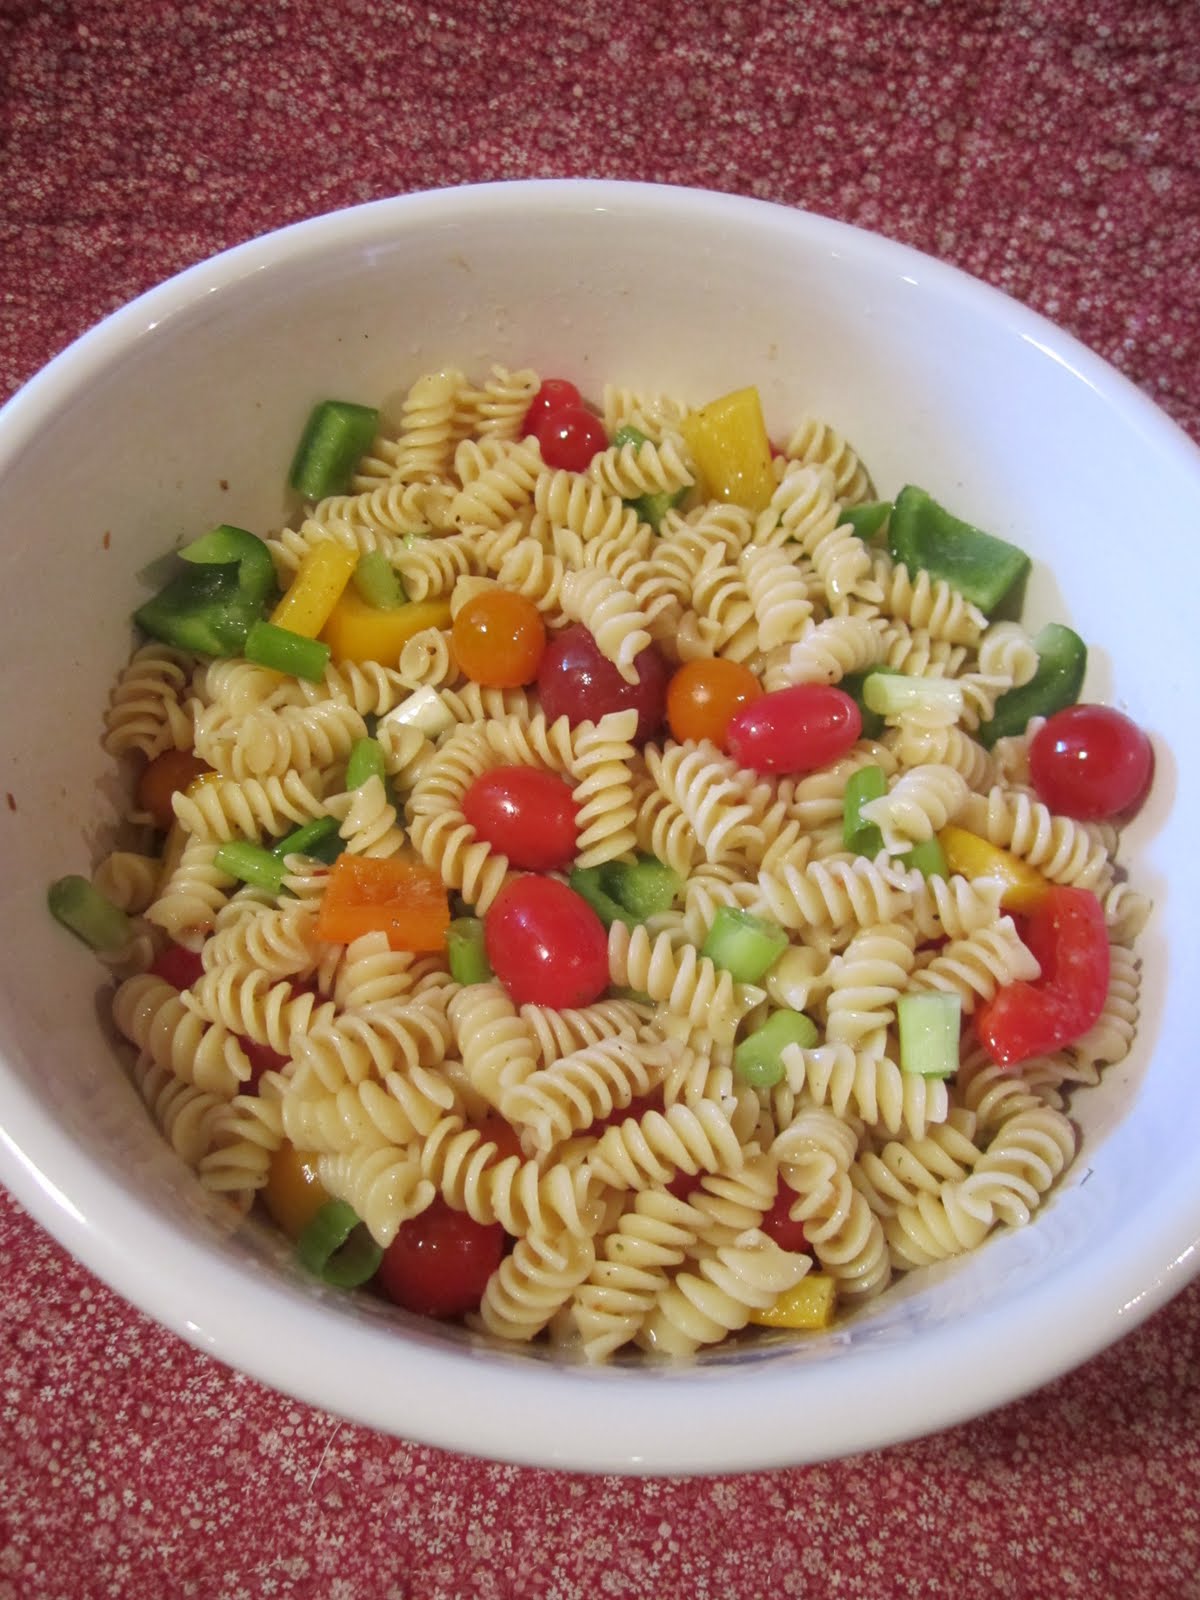 Wendys Hat: How to Make a Cold Pasta Salad Recipe